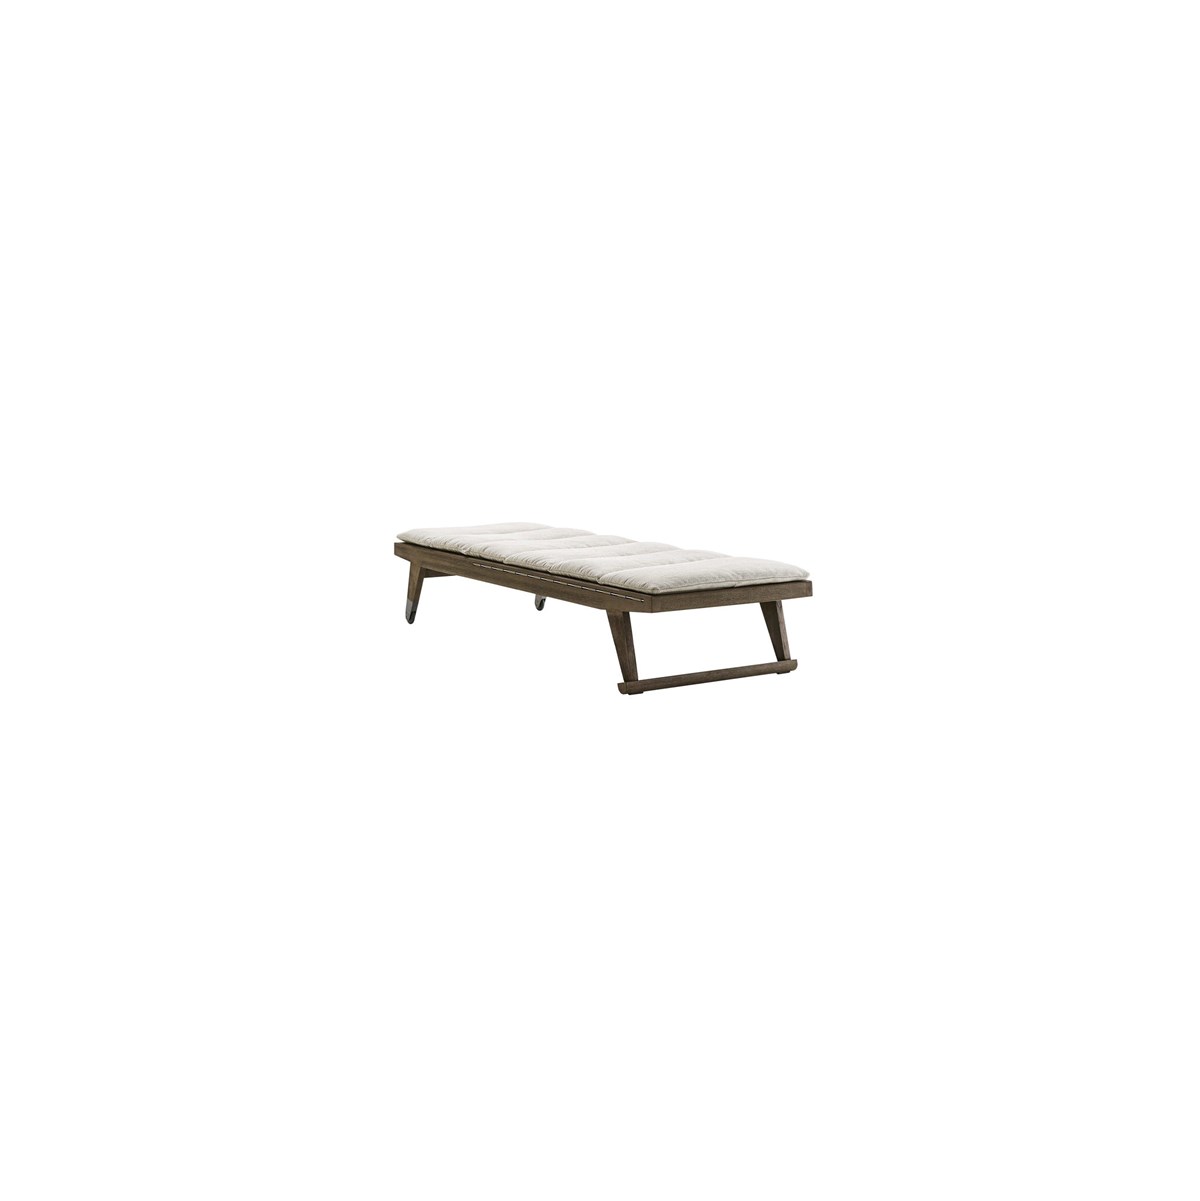 Thisasslider 1 53118 Outdoor Chaise Longue Gio 02 1 1